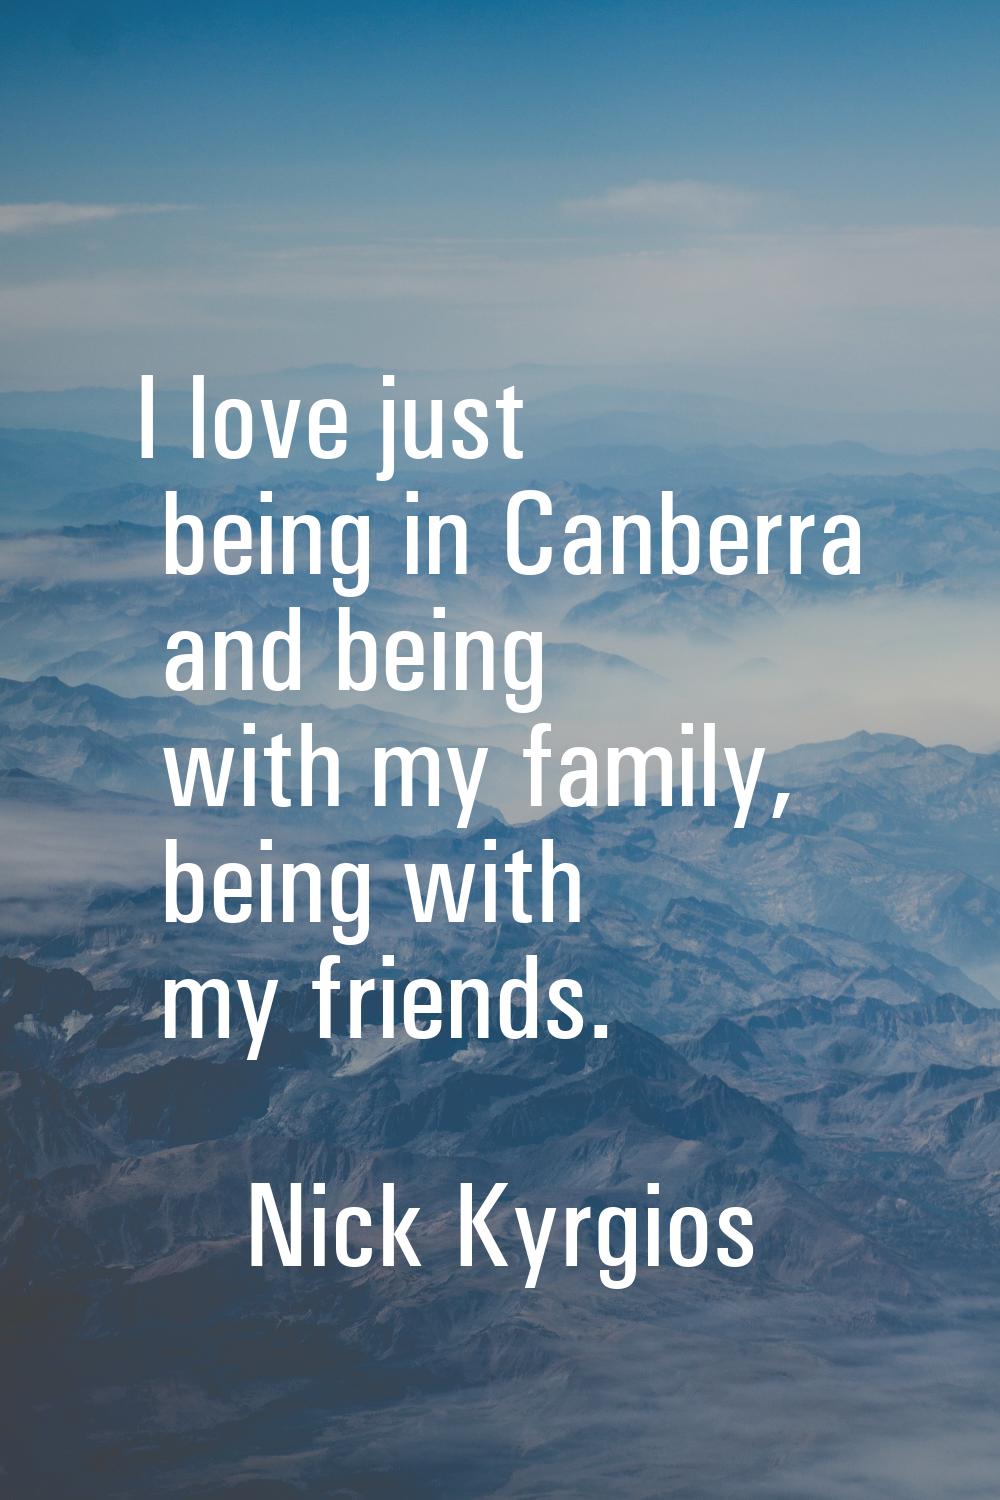 I love just being in Canberra and being with my family, being with my friends.